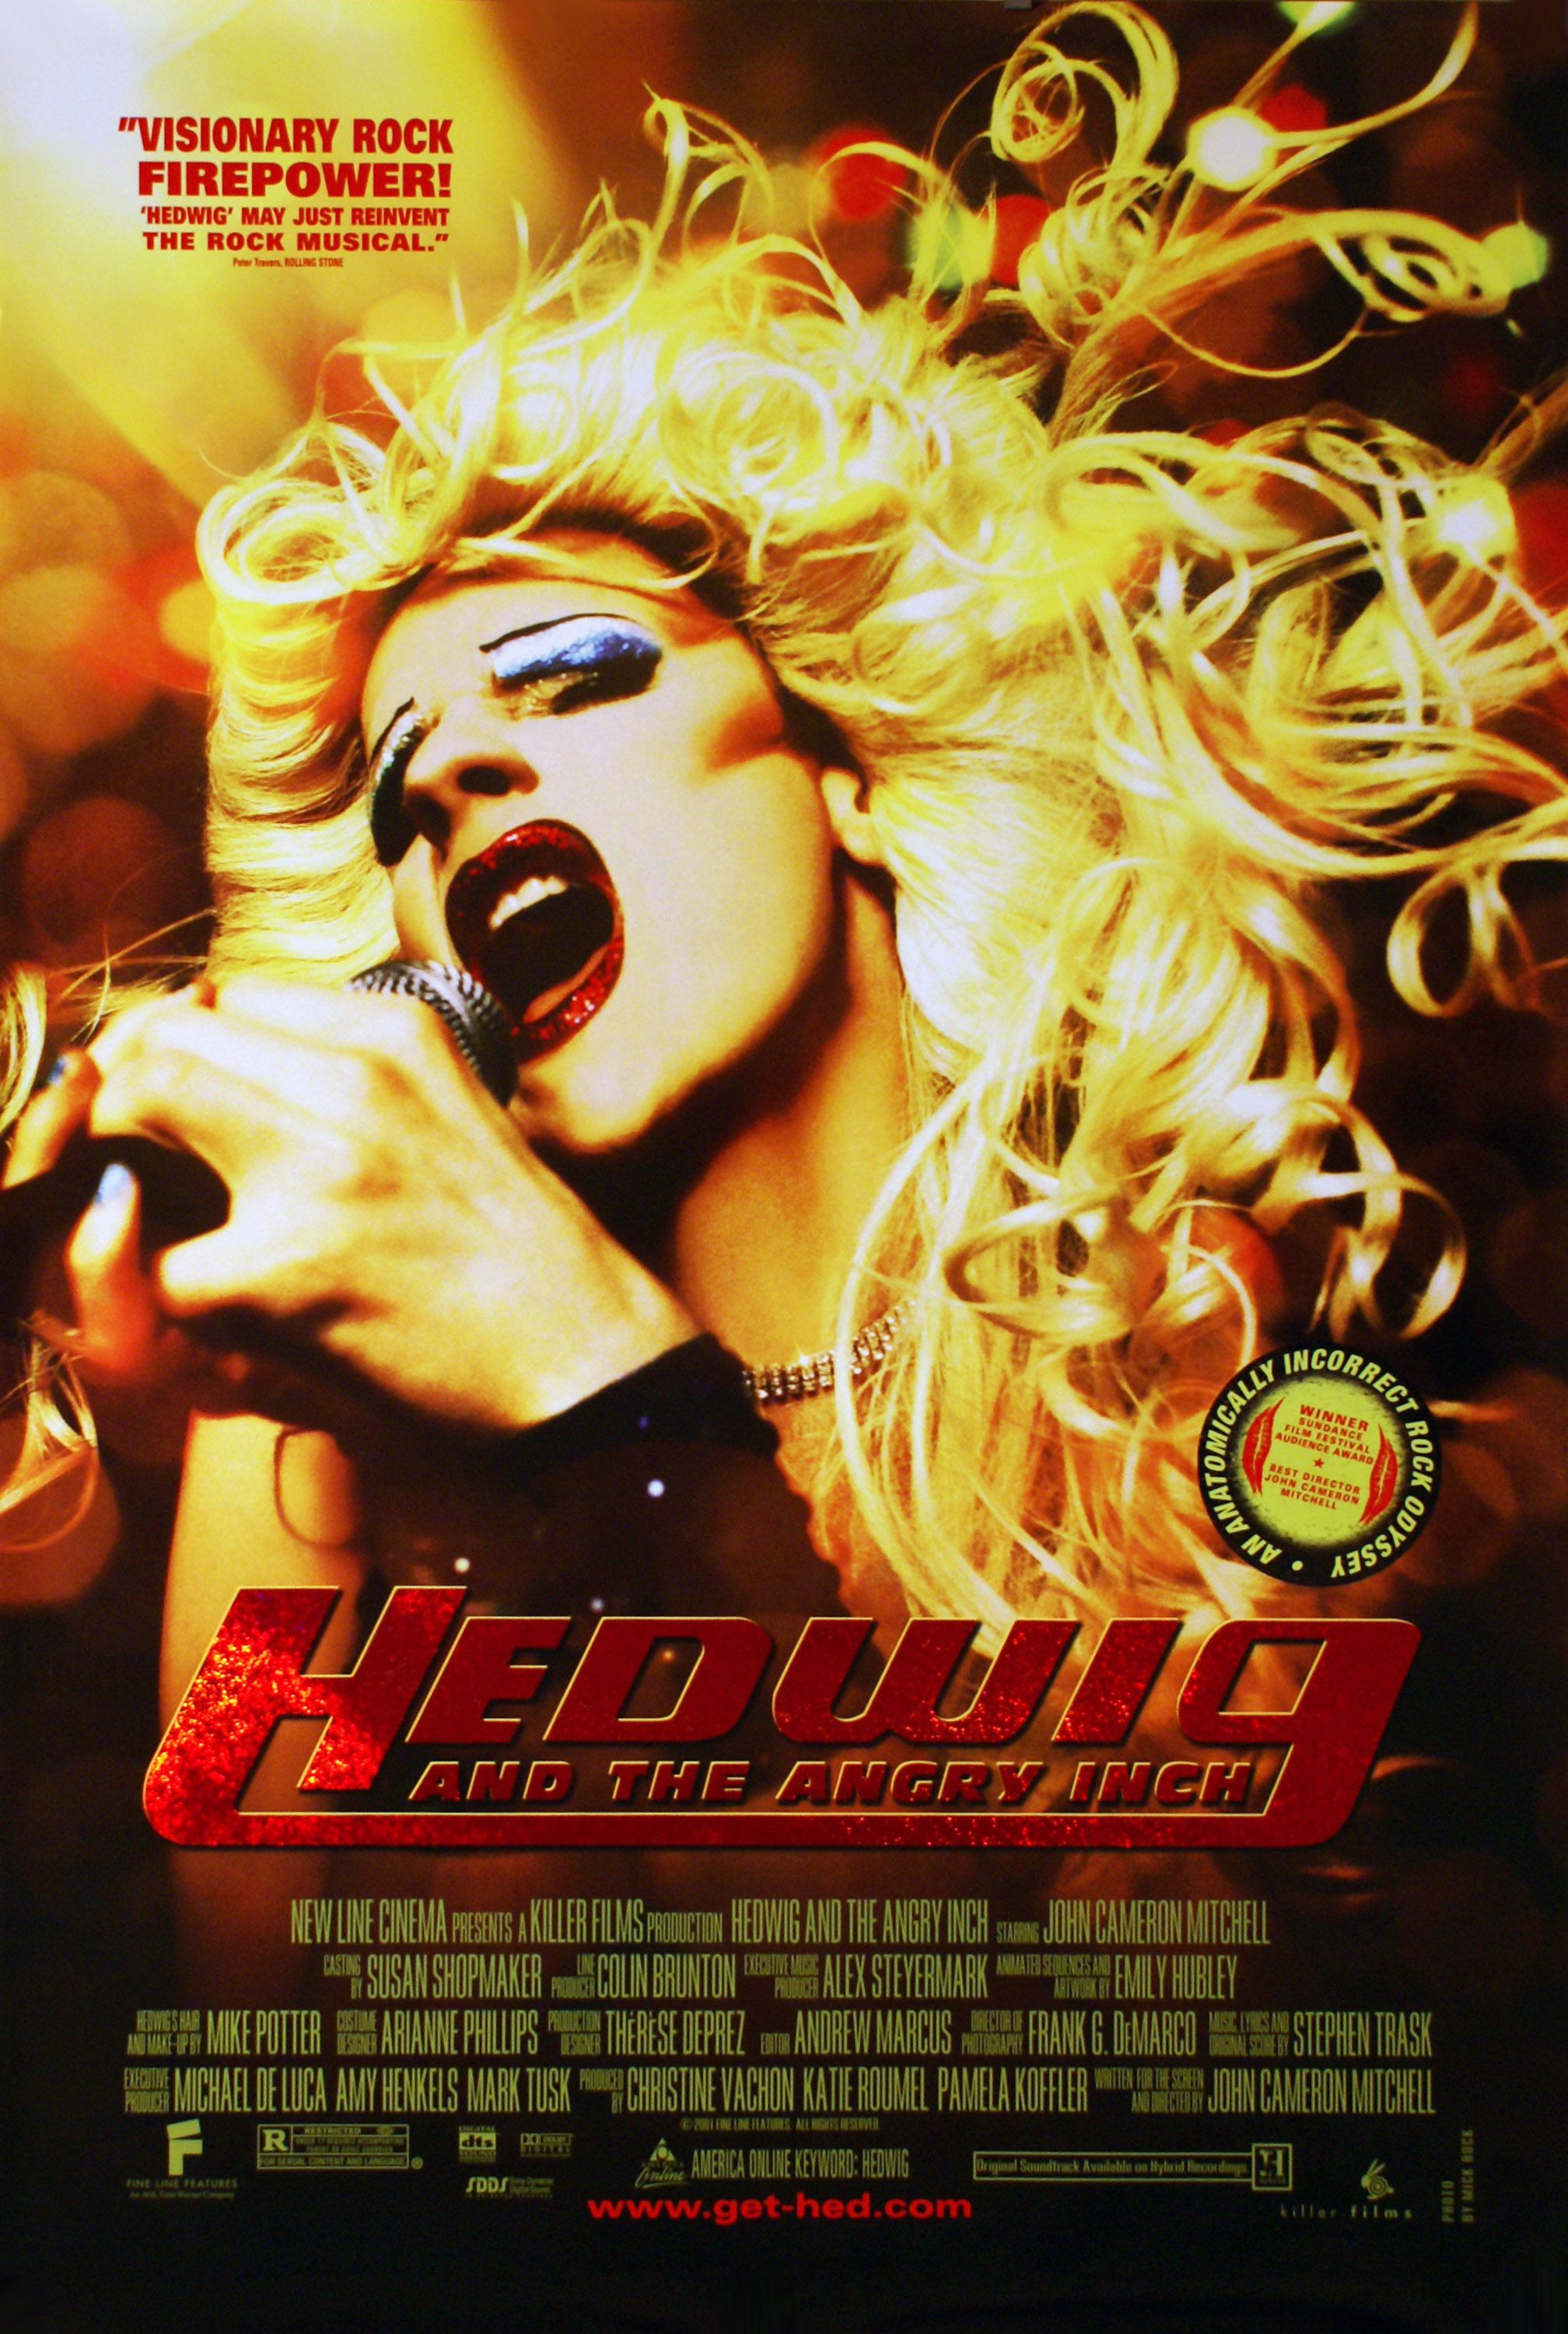 Hedwig singing on the Movie Poster for Hedwig and the Angry Inch